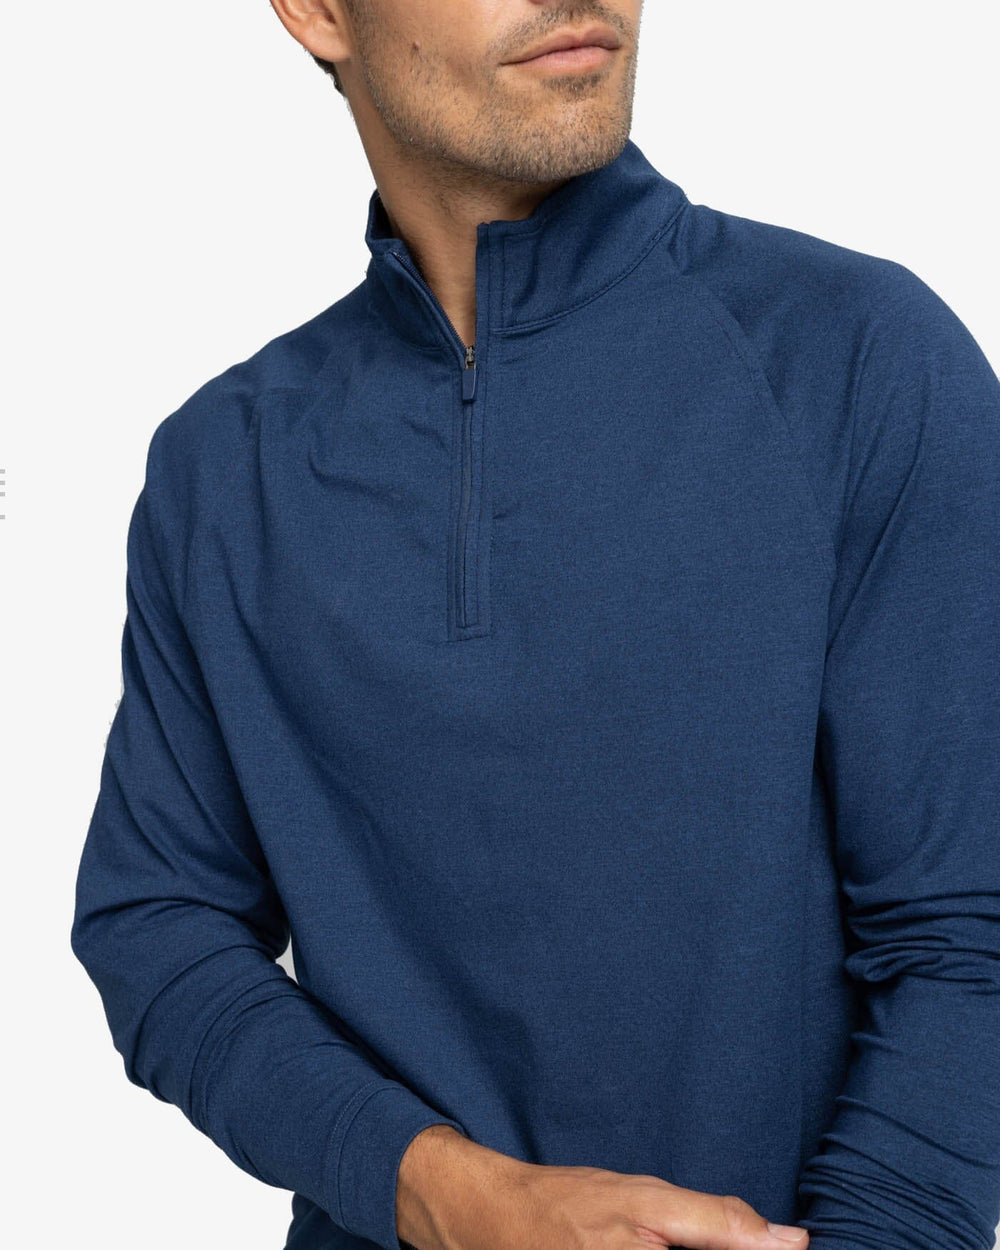 The detail view of the Southern Tide Cruiser Heather Quarter Zip Pullover by Southern Tide - Heather Dress Blue